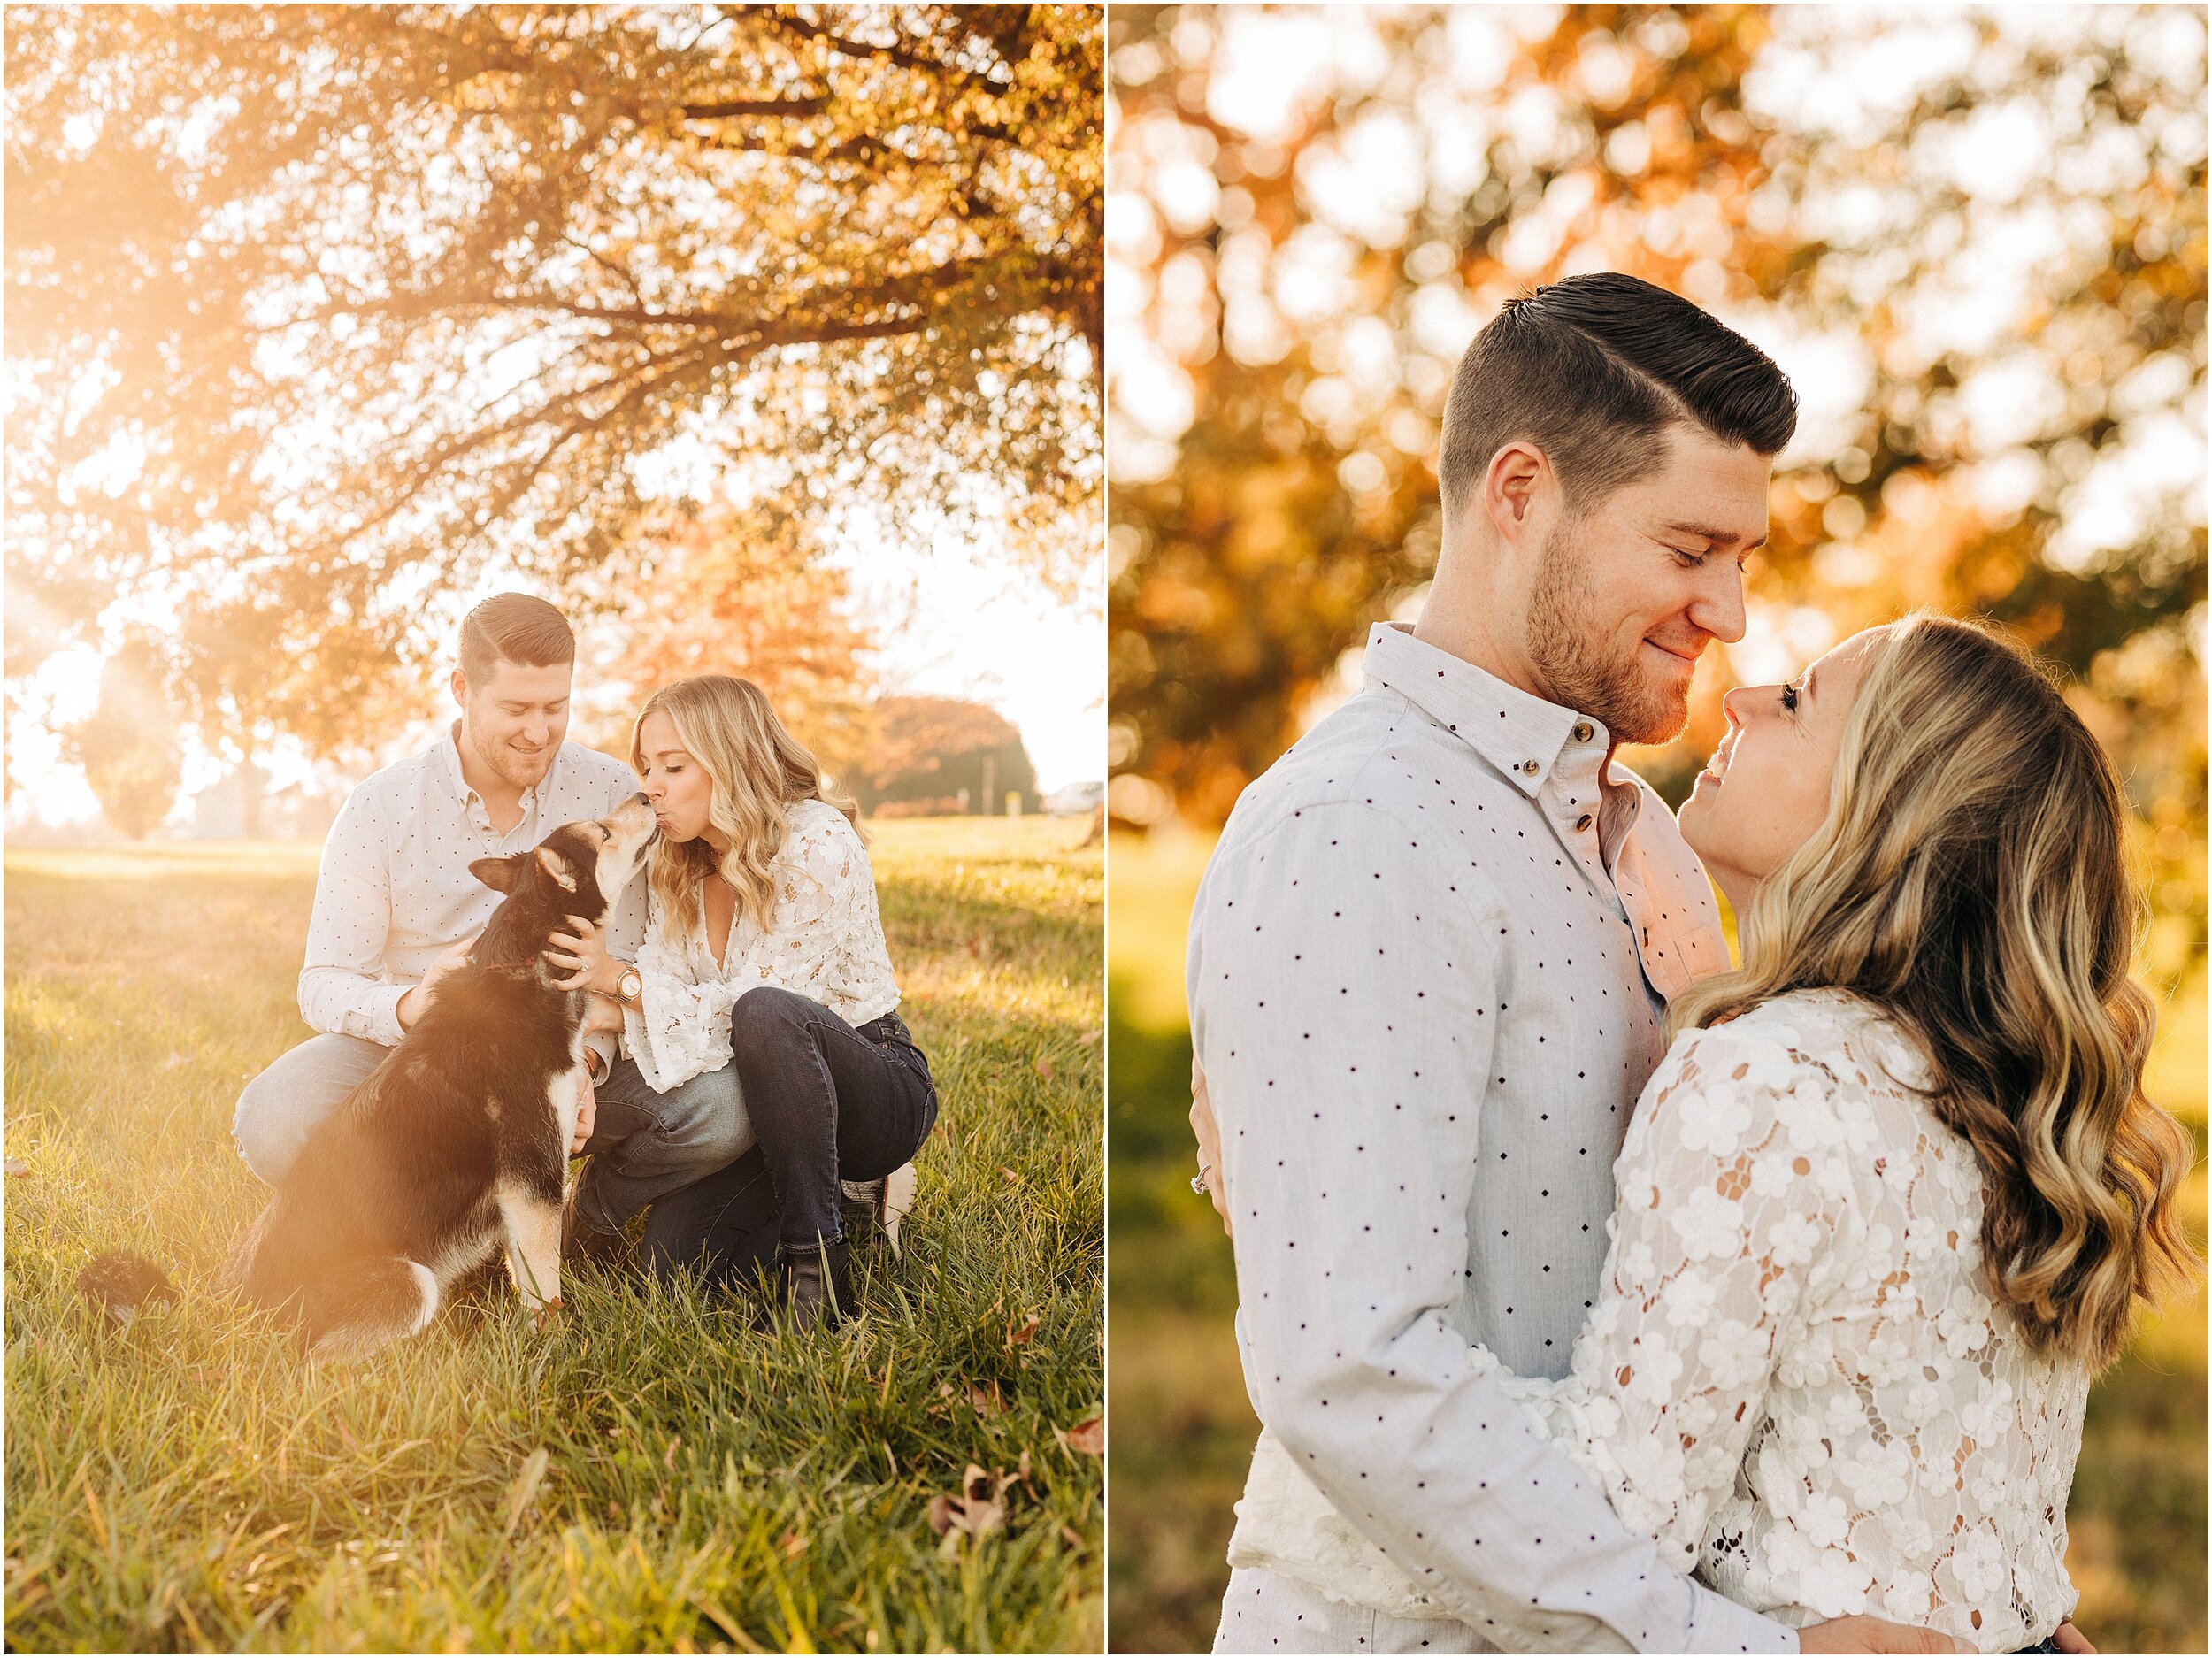 hannah leigh photography Baltimore City Maryland October Engagement Session_7054.jpg